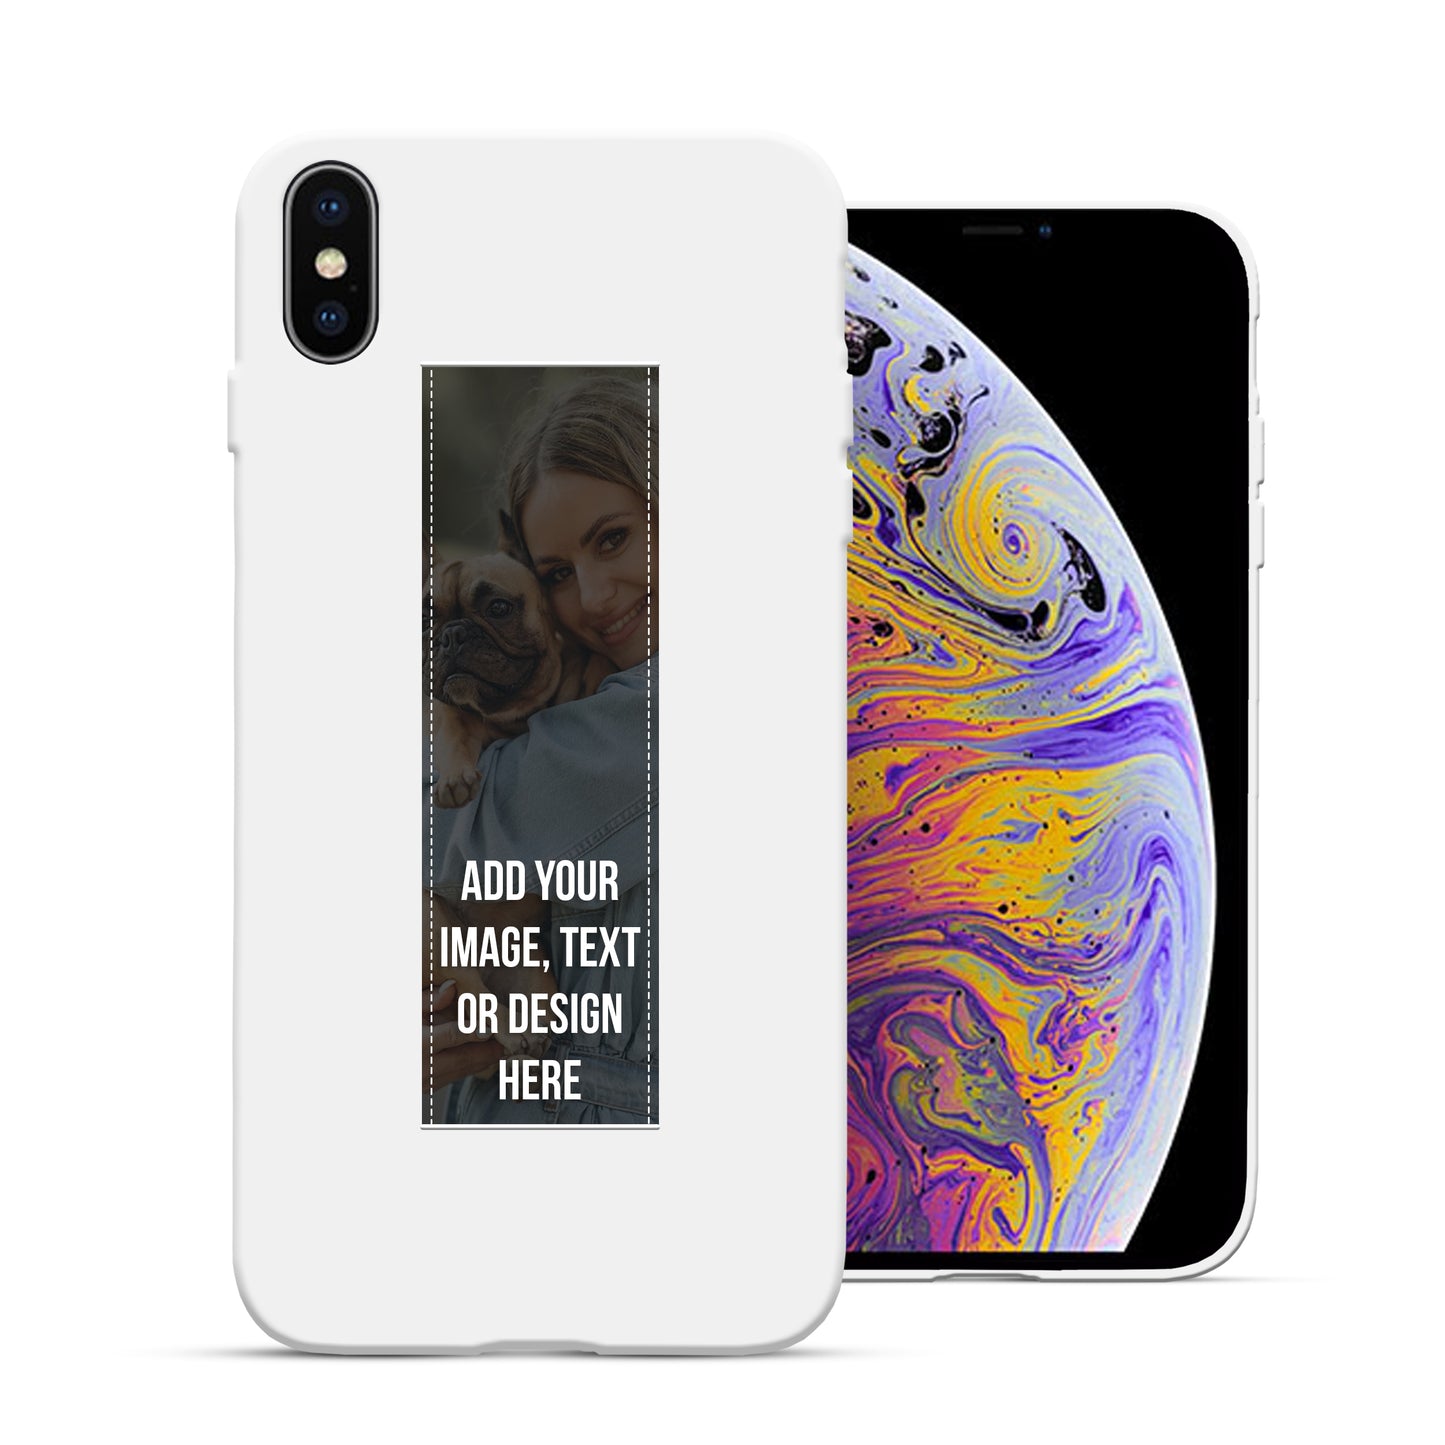 Finger Loop Phone Case For iPhone XS Max White With Custom Strap